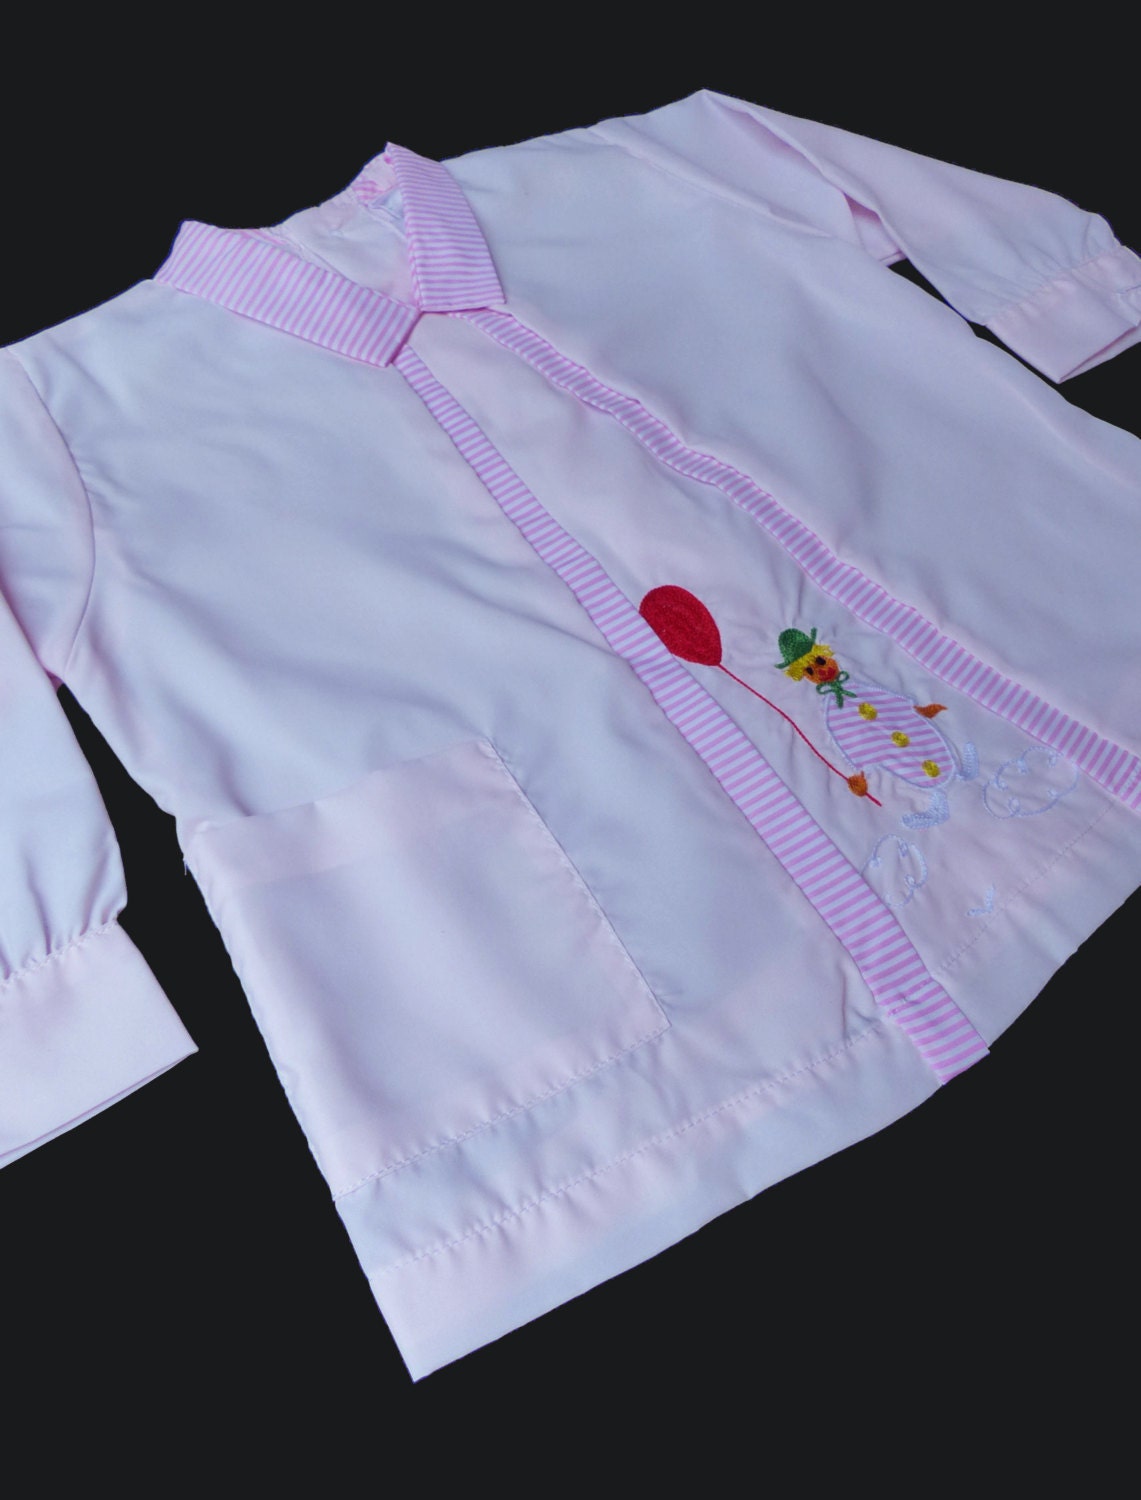 60's Embroidered School Overall Blouse French Stock 9-12 Months